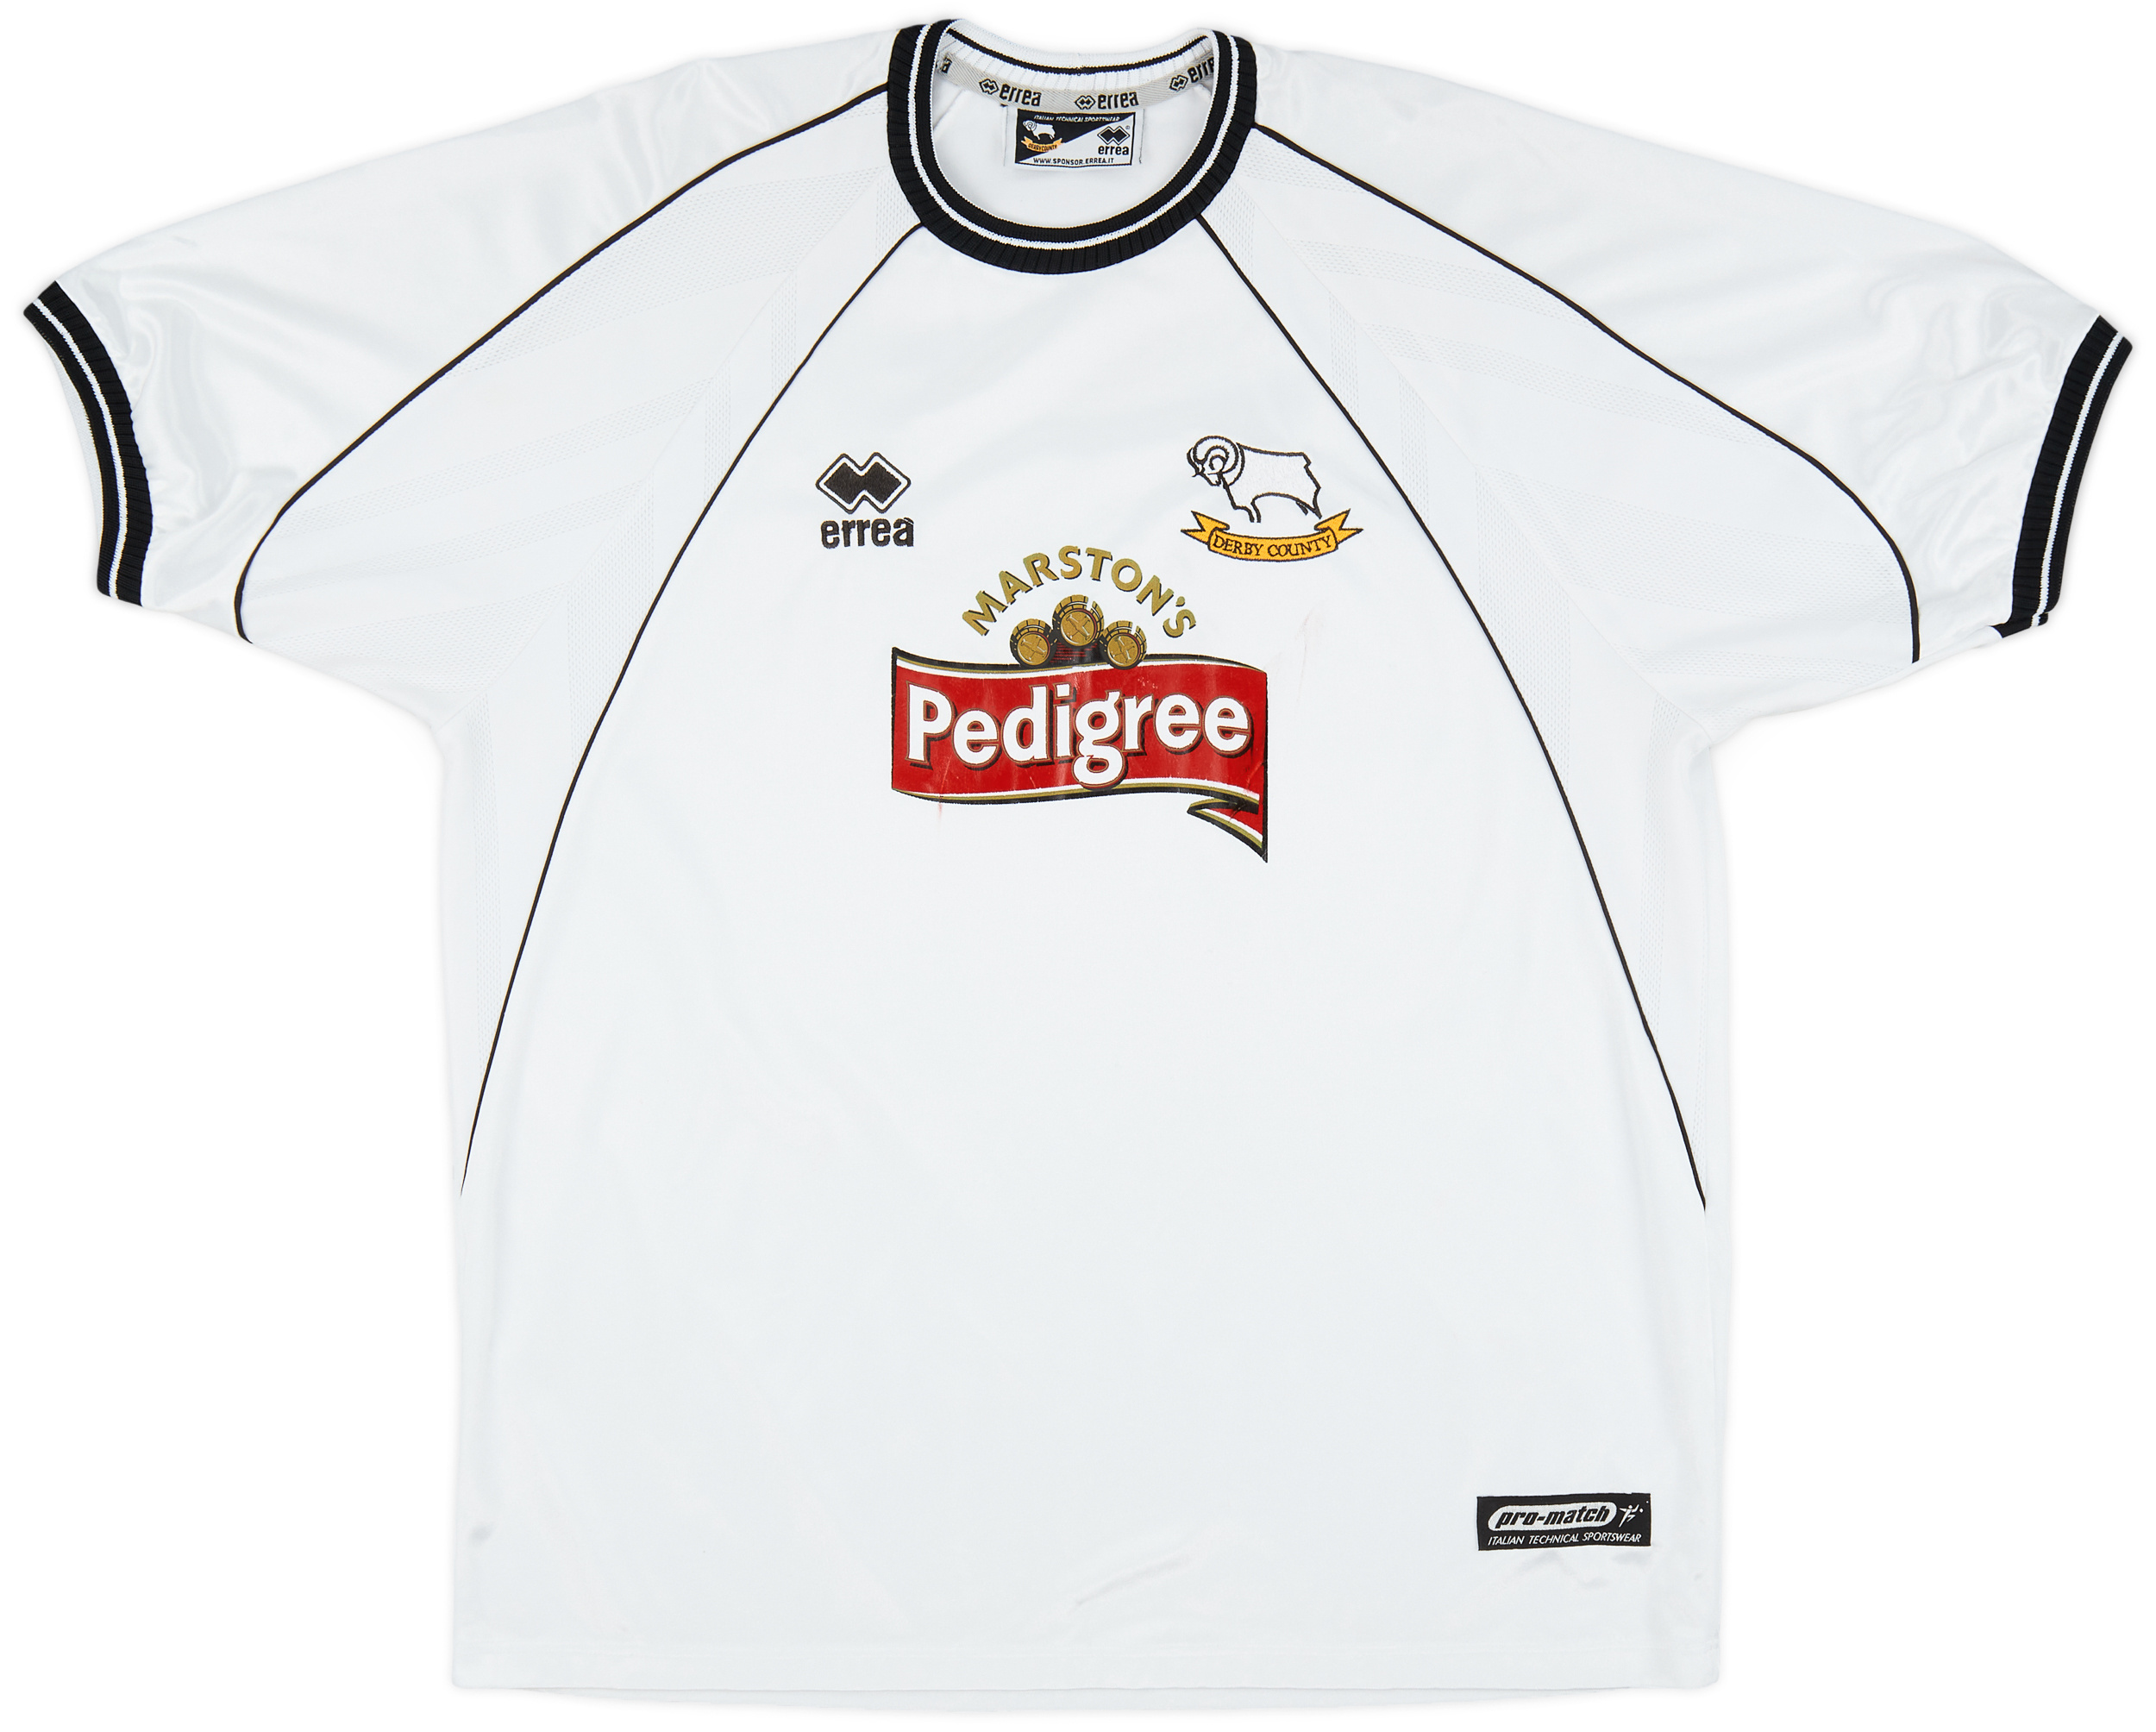 2001-02 Derby County Home Shirt - 6/10 - ()